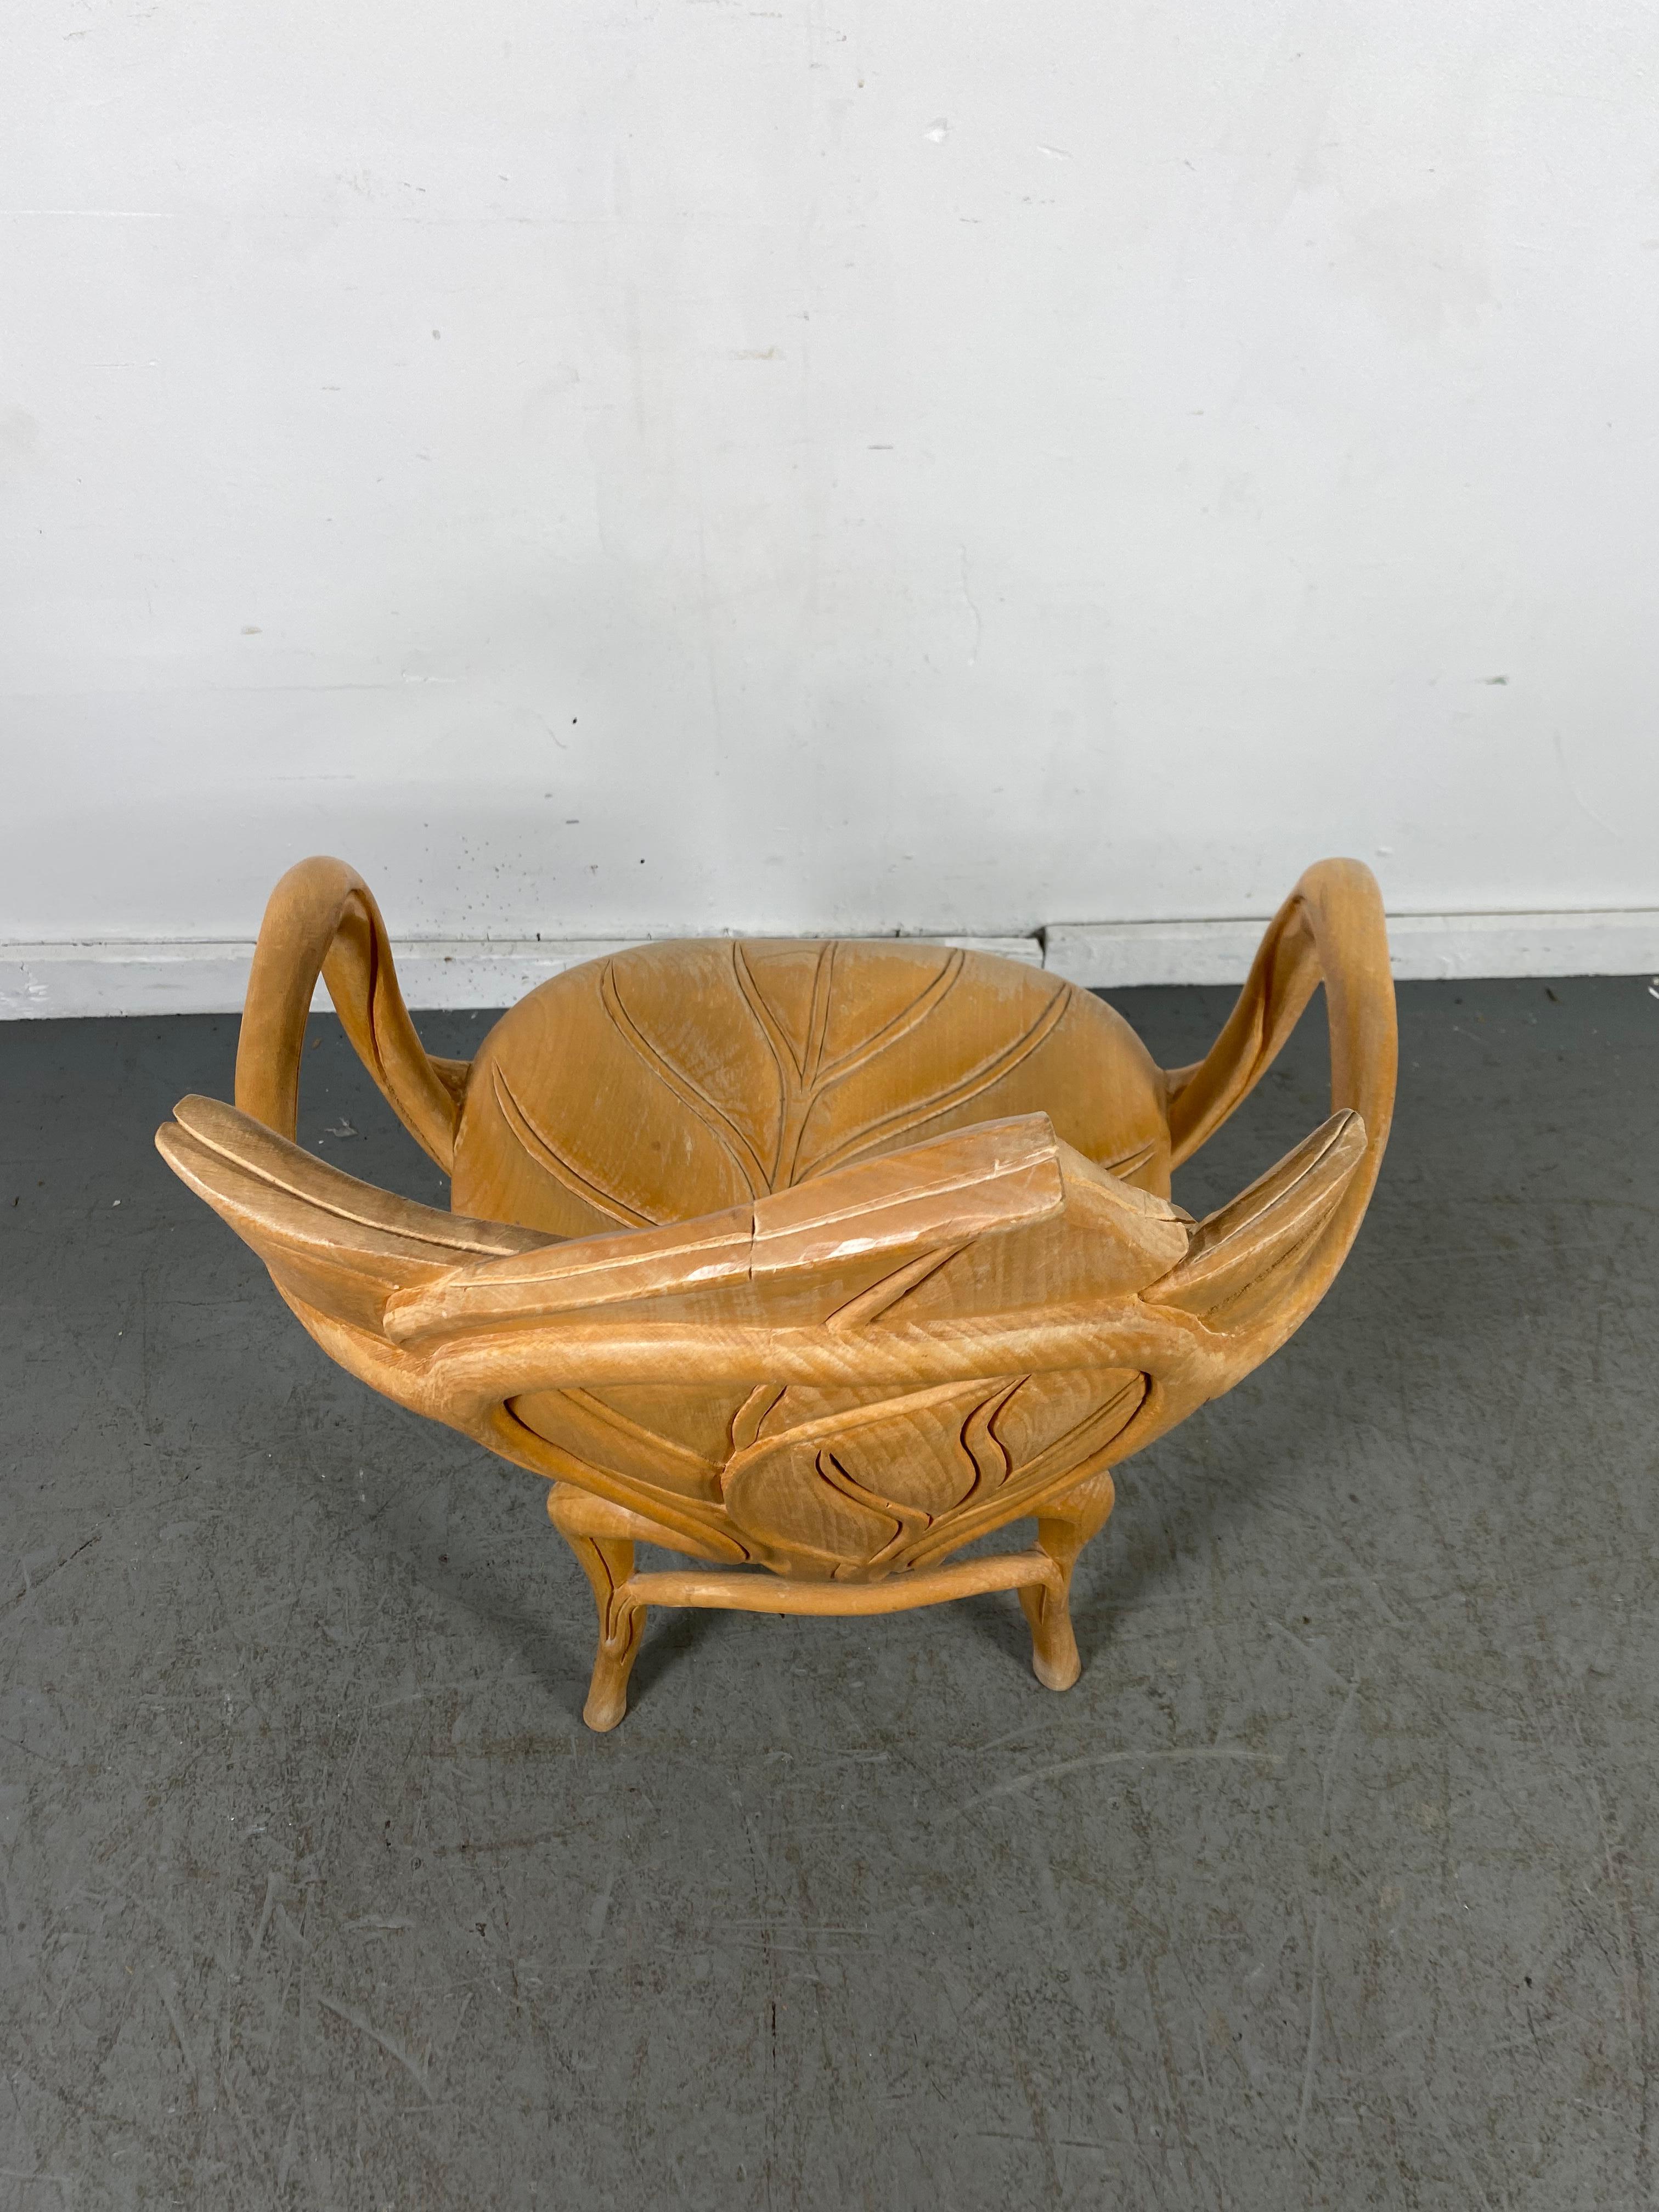 Bartolozzi & Maioli Carved Wooden Leaf Armchair In Good Condition For Sale In Buffalo, NY